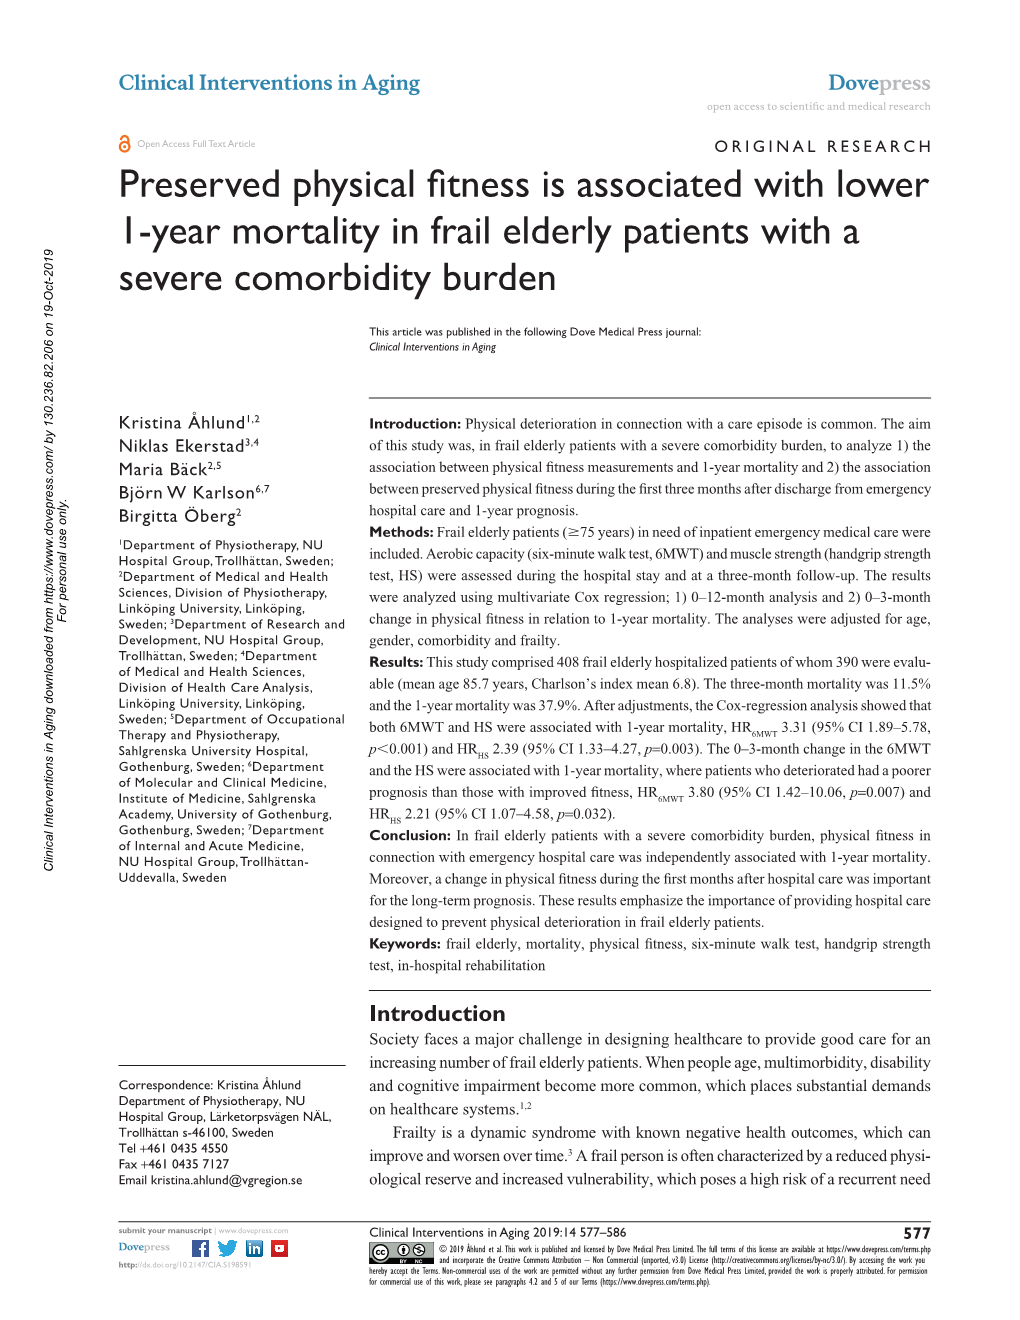 Preserved Physical Fitness Is Associated with Lower 1-Year Mortality in Frail Elderly Patients with a Severe Comorbidity Burden